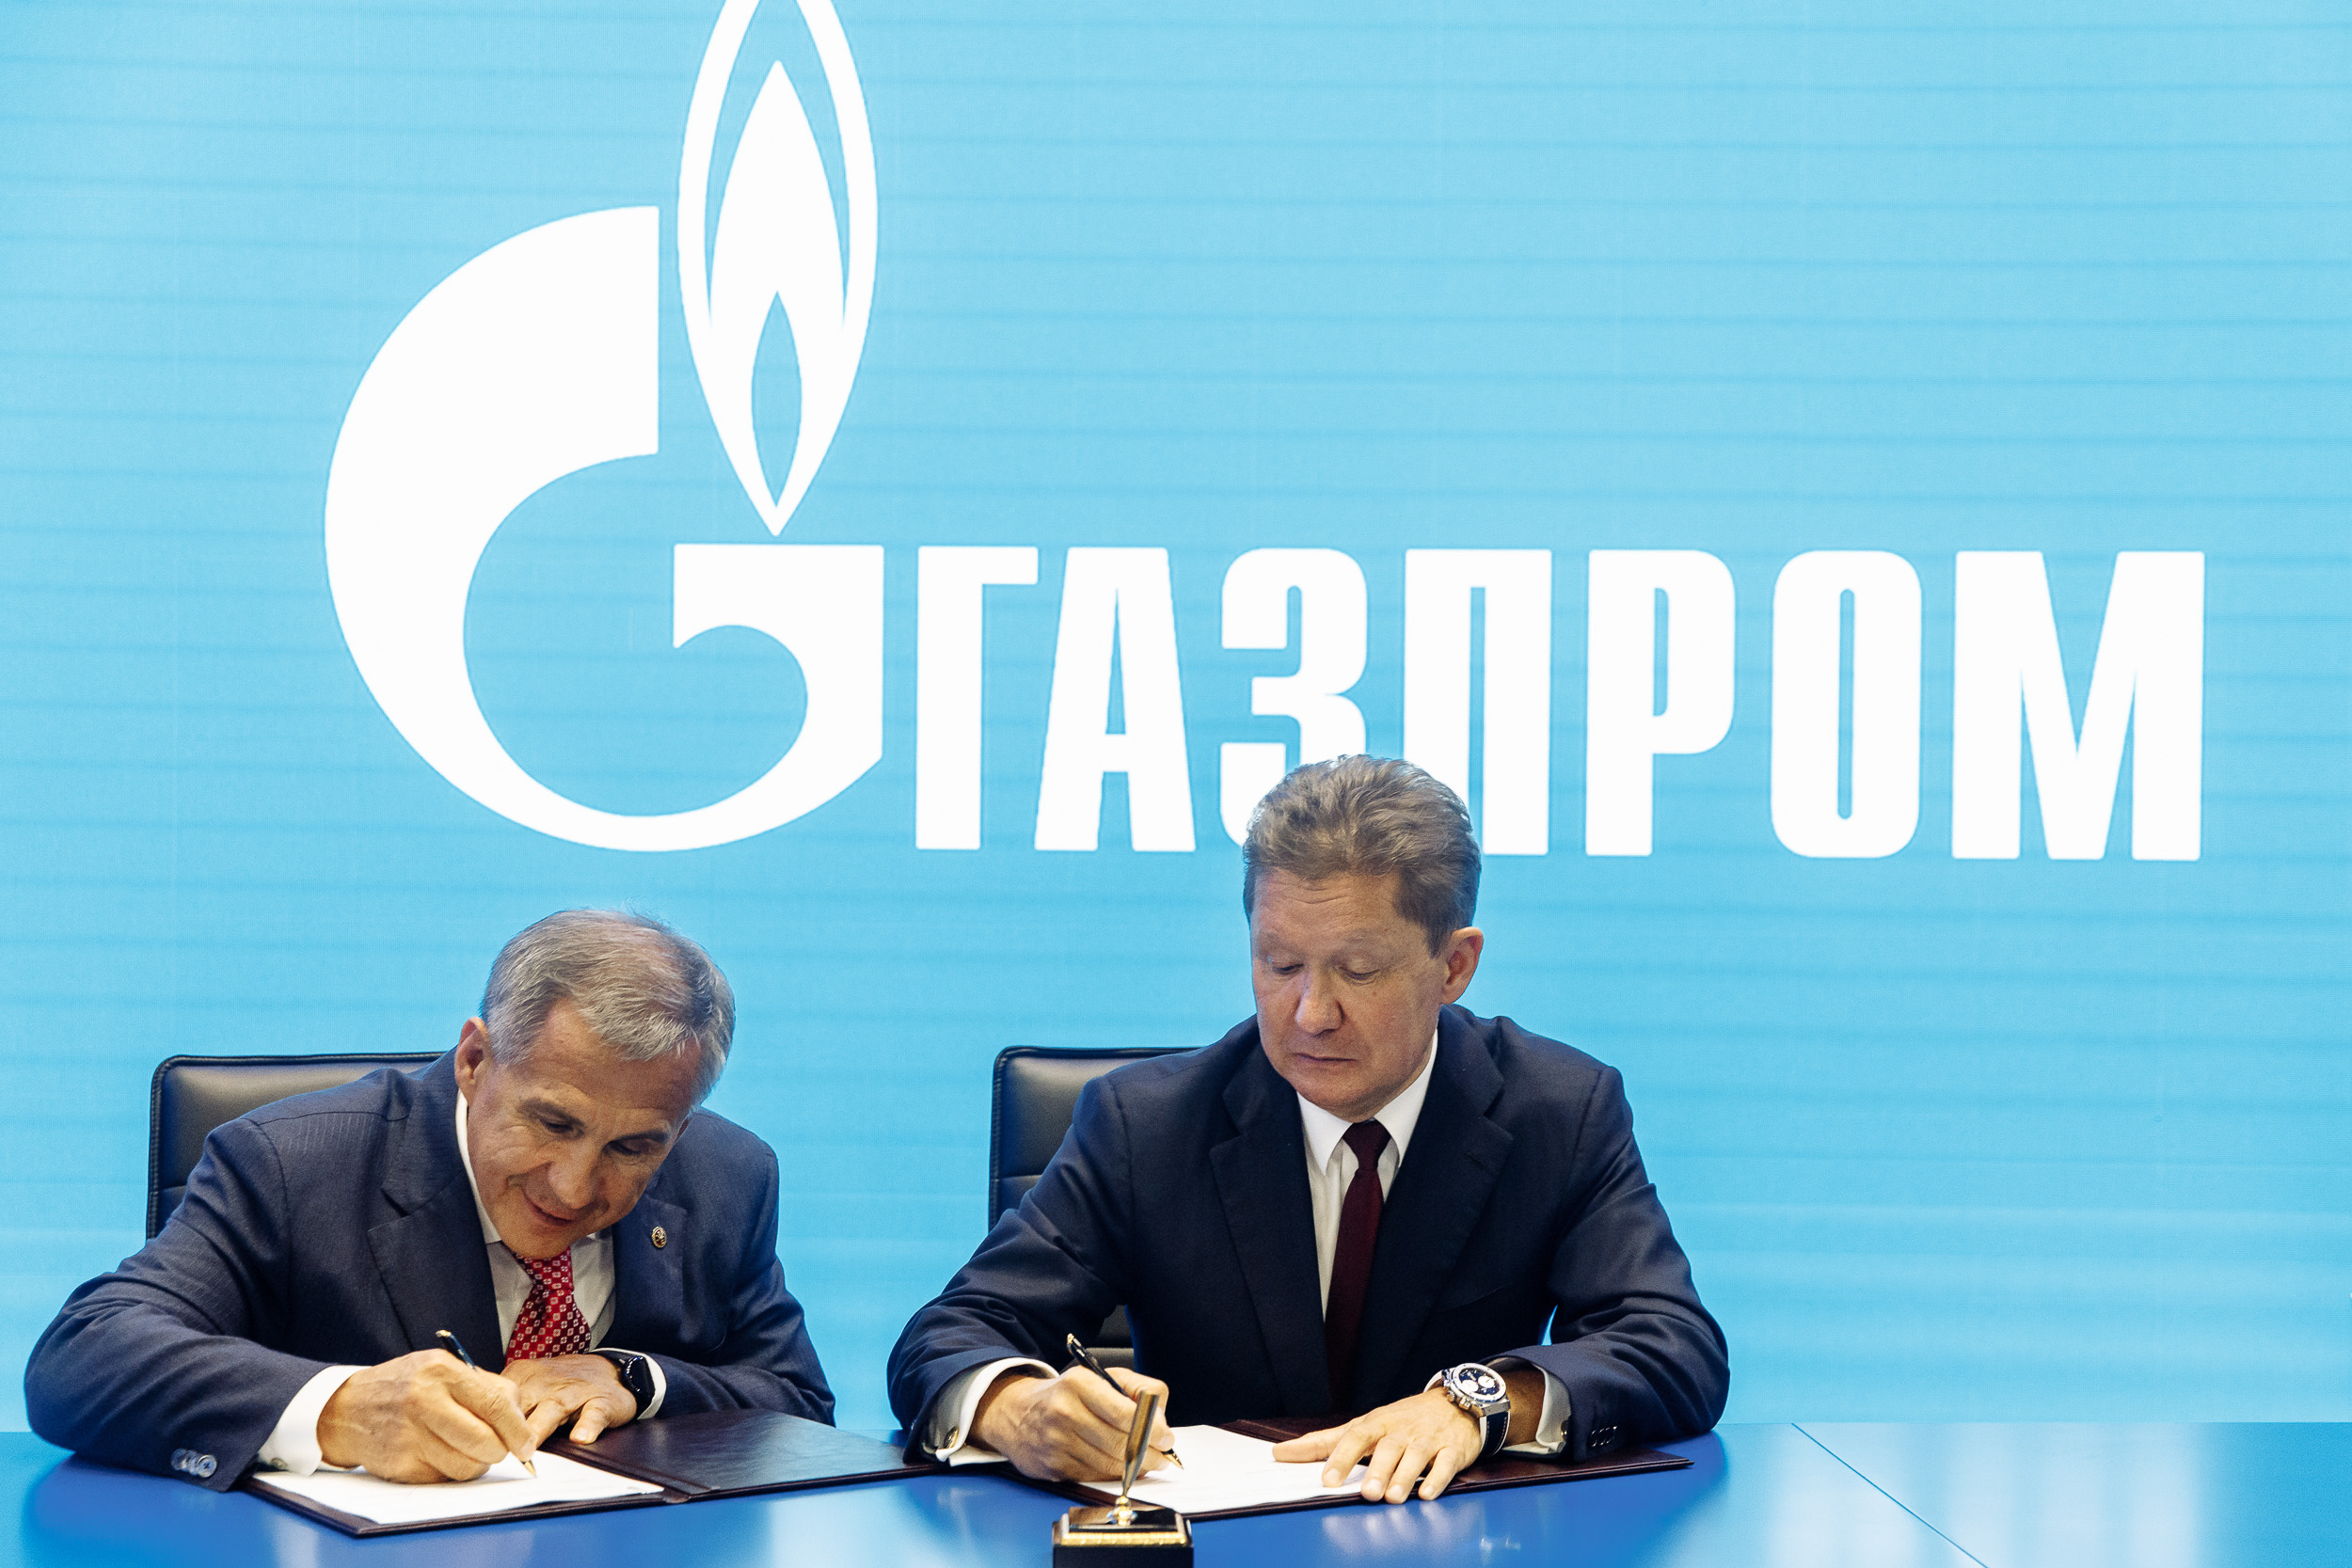 Agreements signed for increased use of natural gas in vehicles